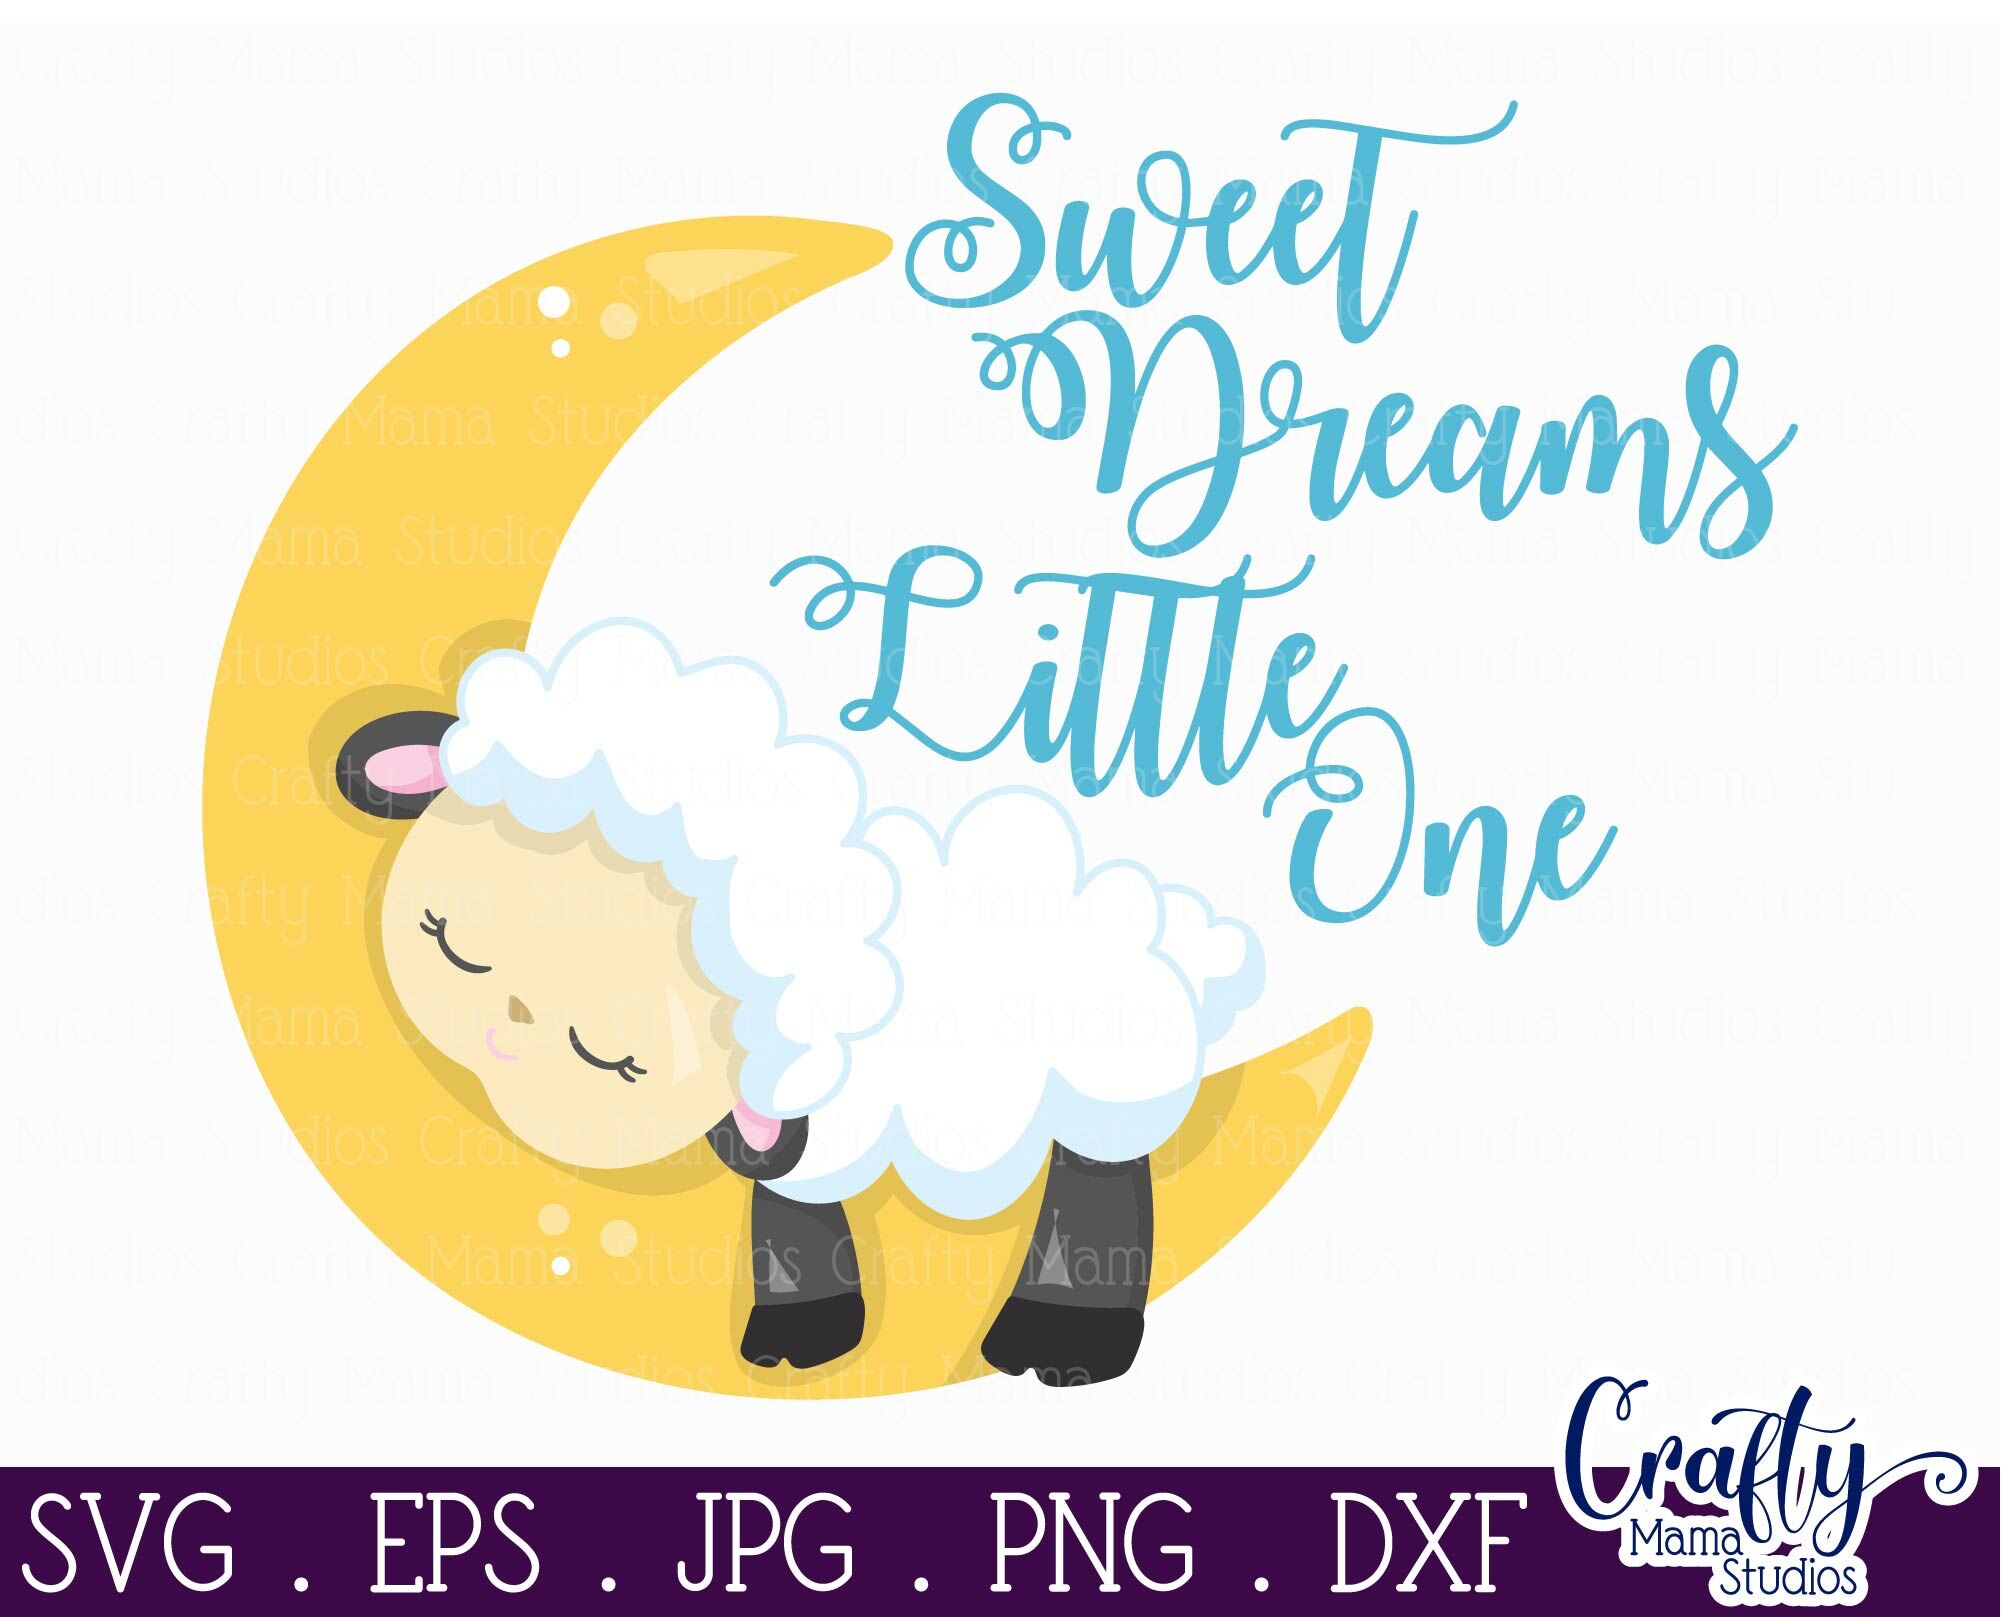 Download Sweet Dreams Svg Sweet Dreams Little One Svg Baby Svg By Crafty Mama Studios Thehungryjpeg Com